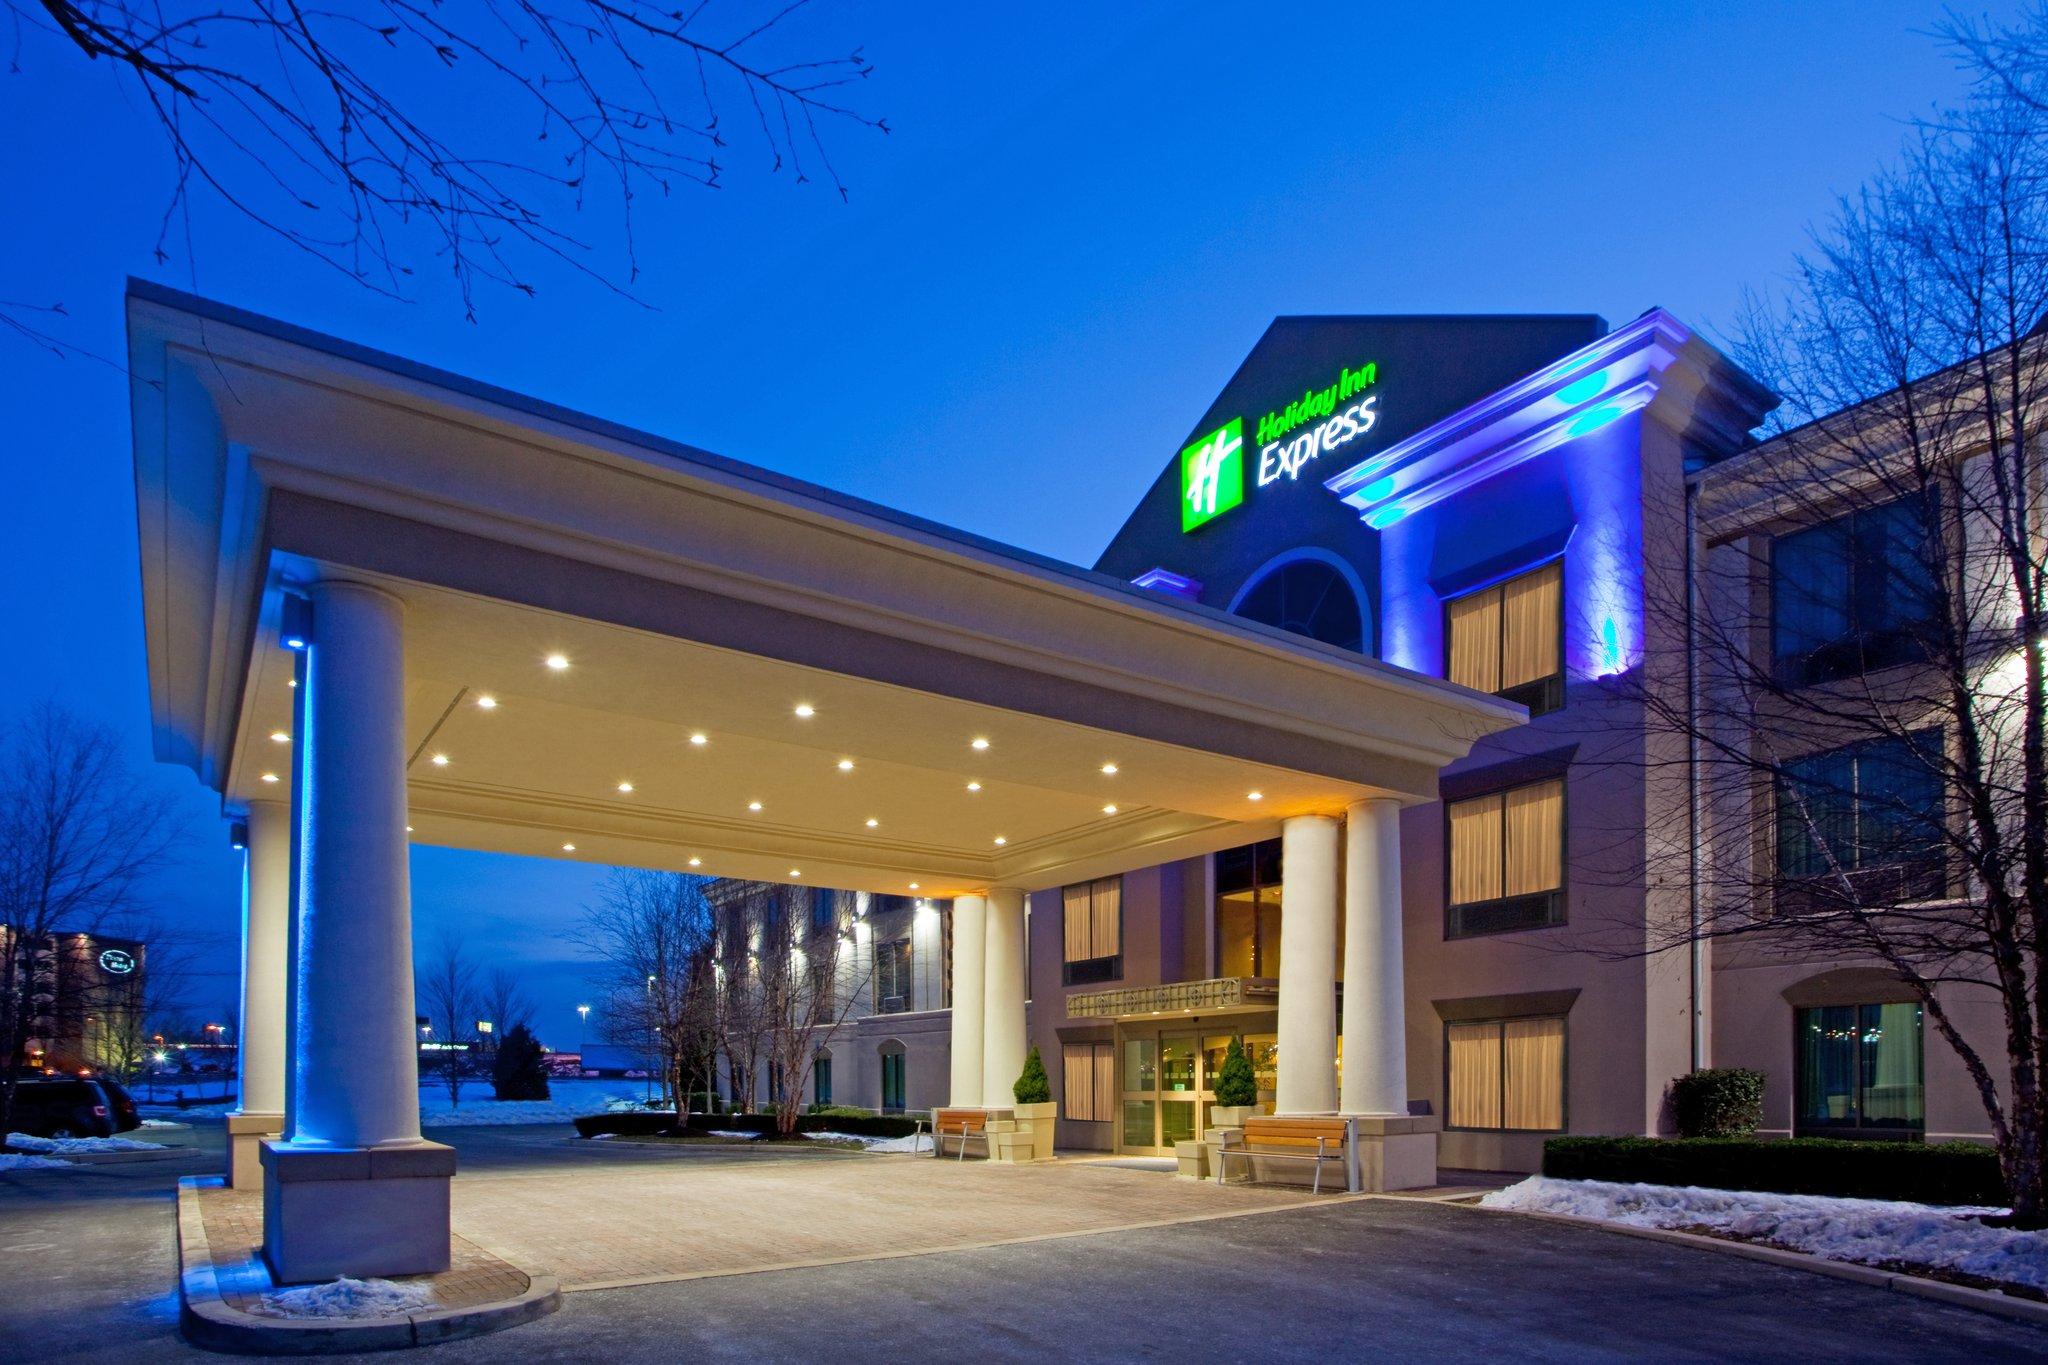 Holiday Inn Express Hotel & Suites Hagerstown in Hagerstown, MD